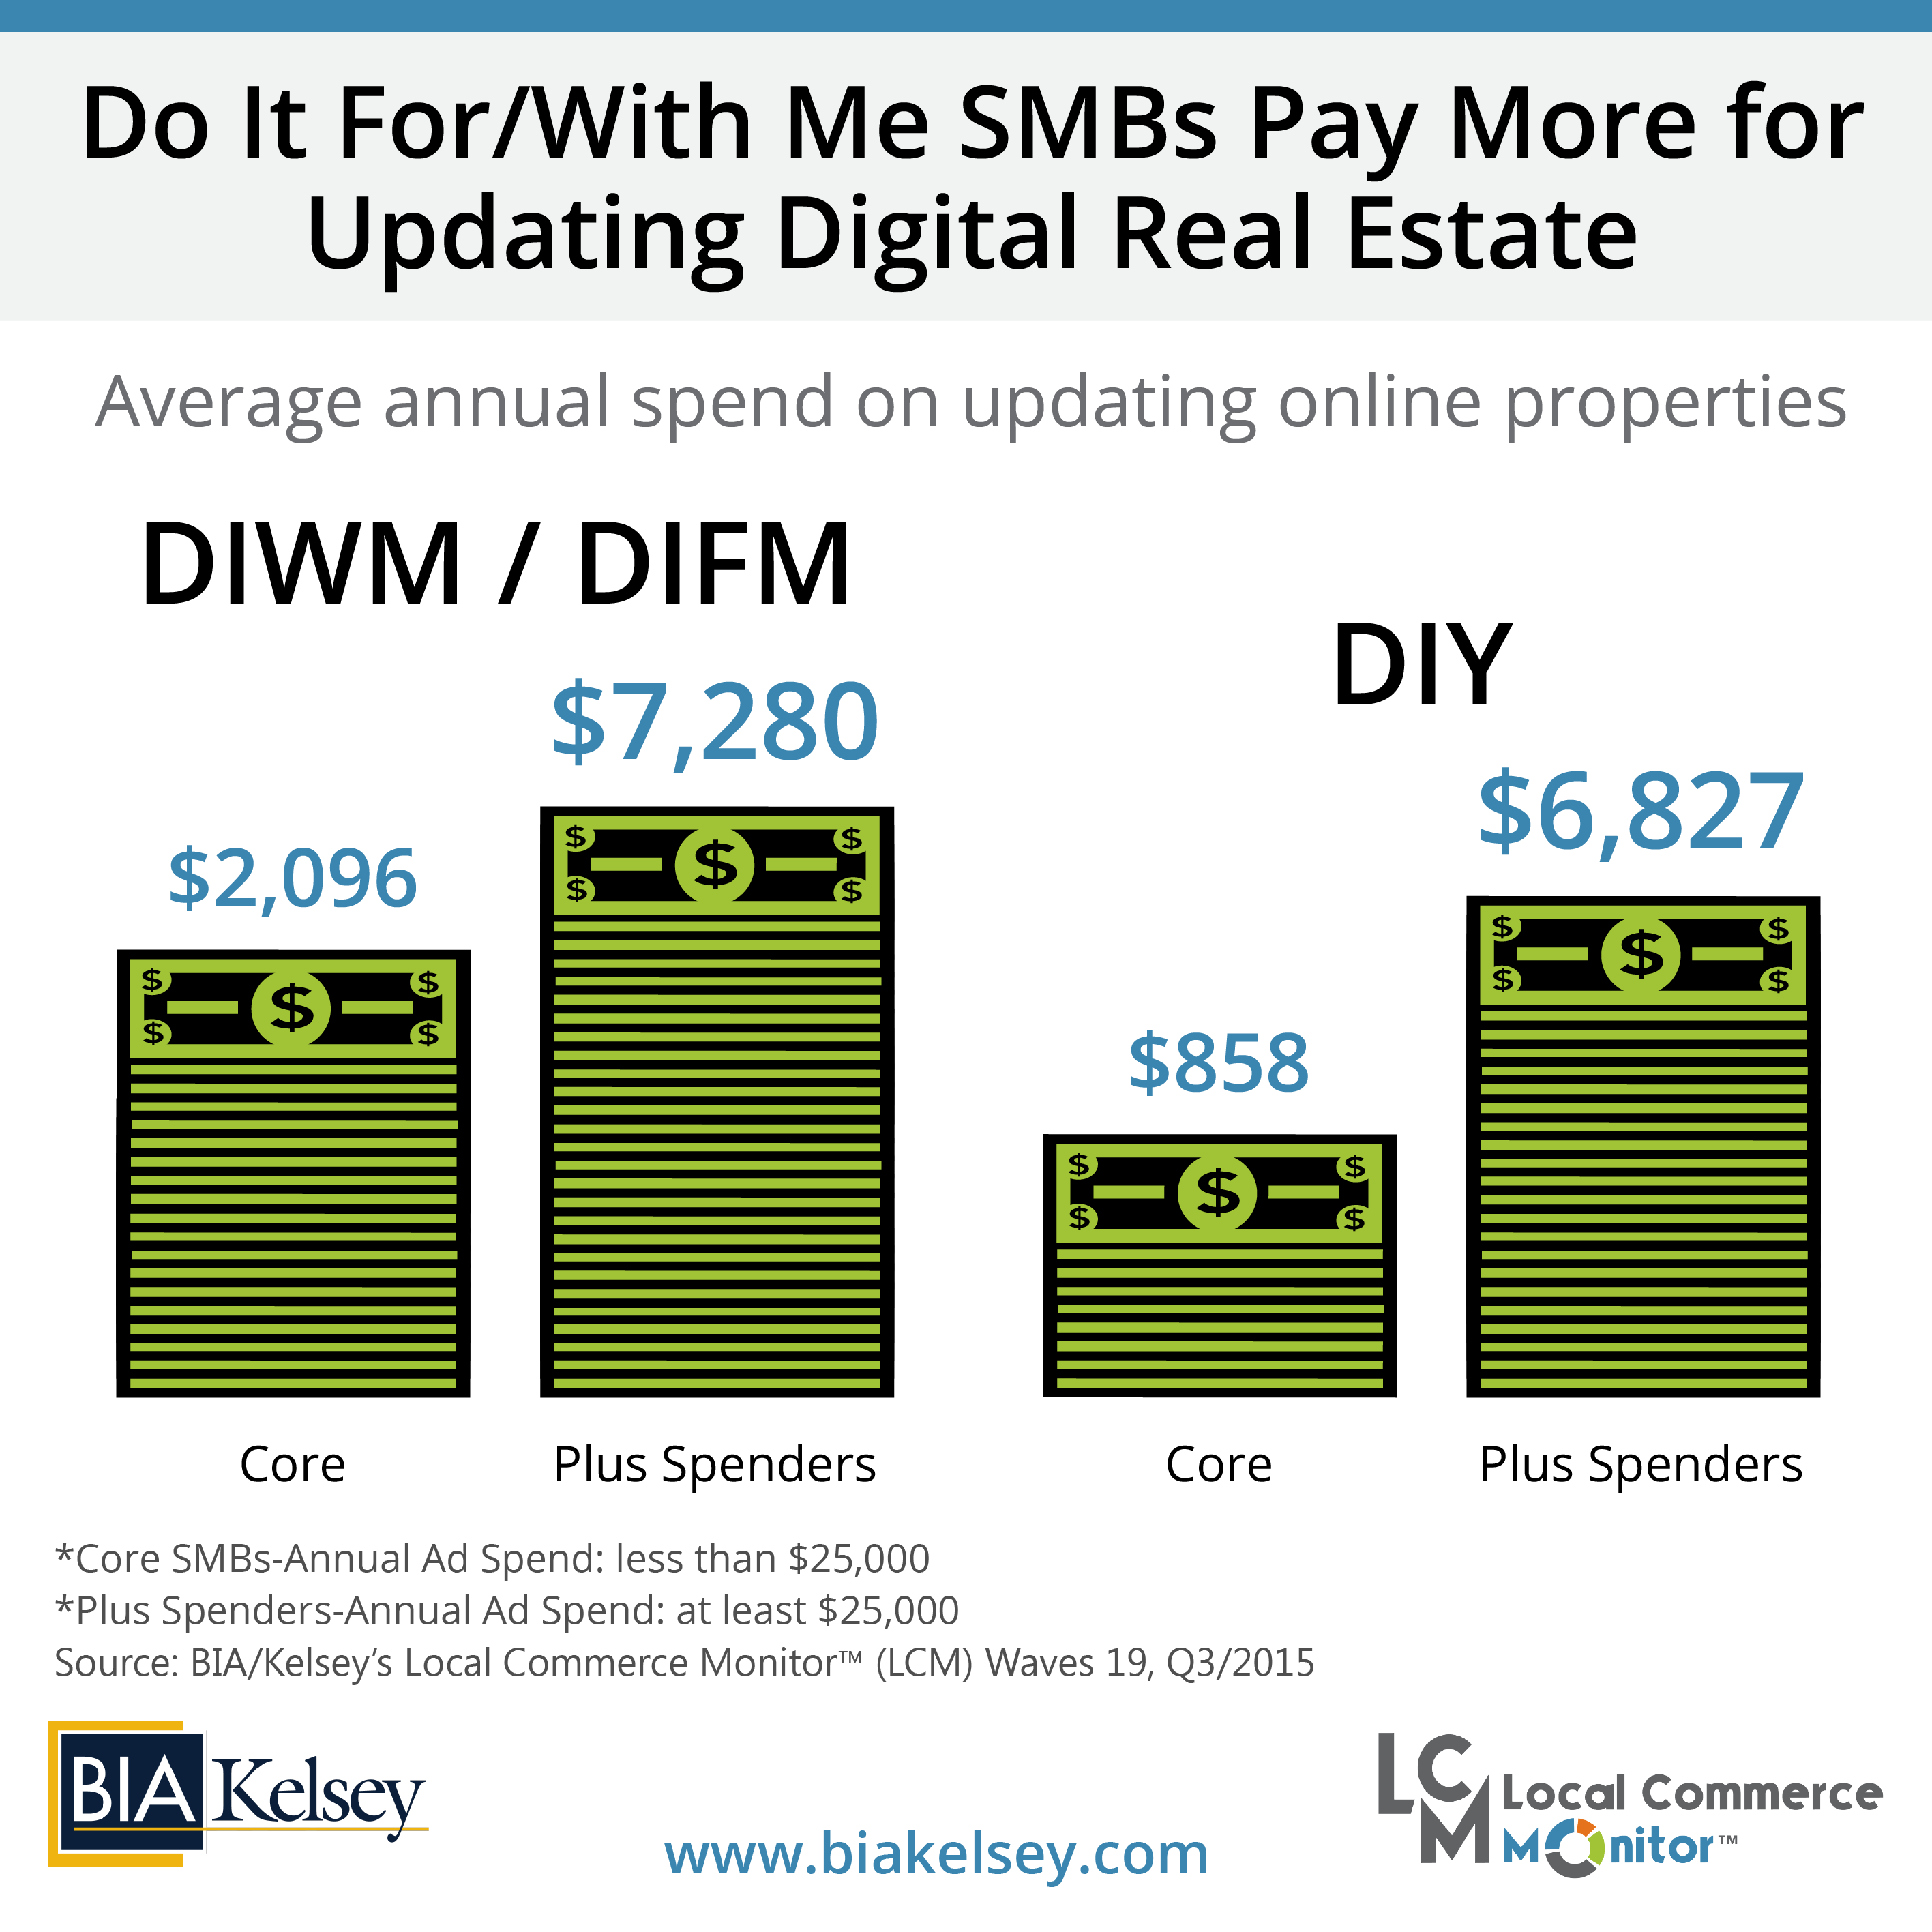 Do It For/With Me SMBs Pay More To Update Digital Real Estate